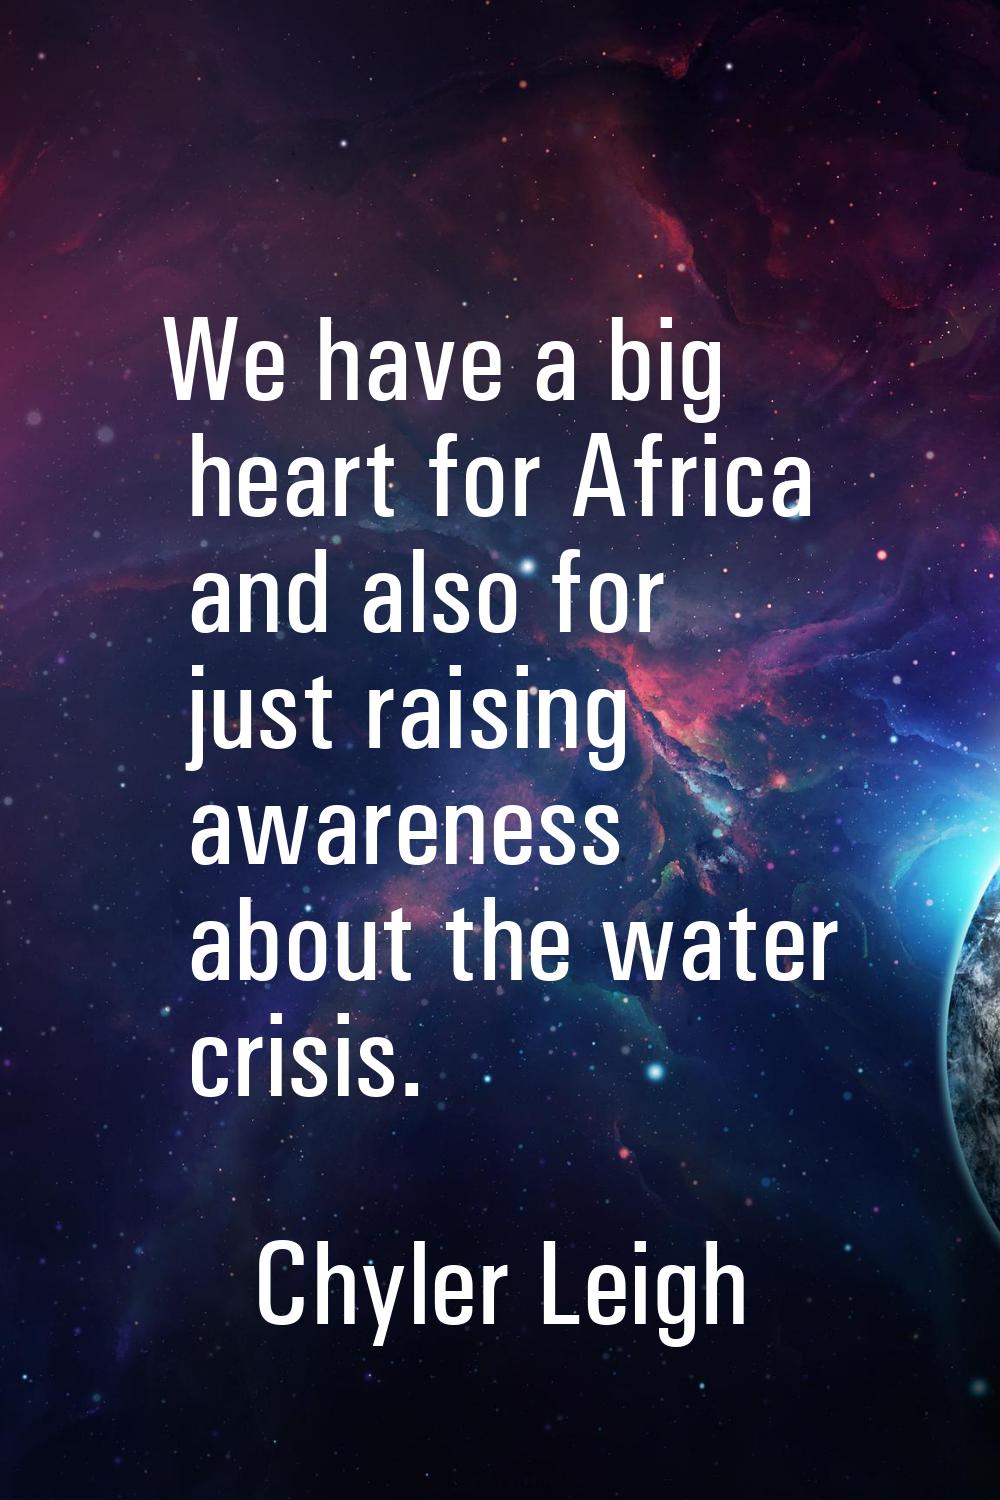 We have a big heart for Africa and also for just raising awareness about the water crisis.